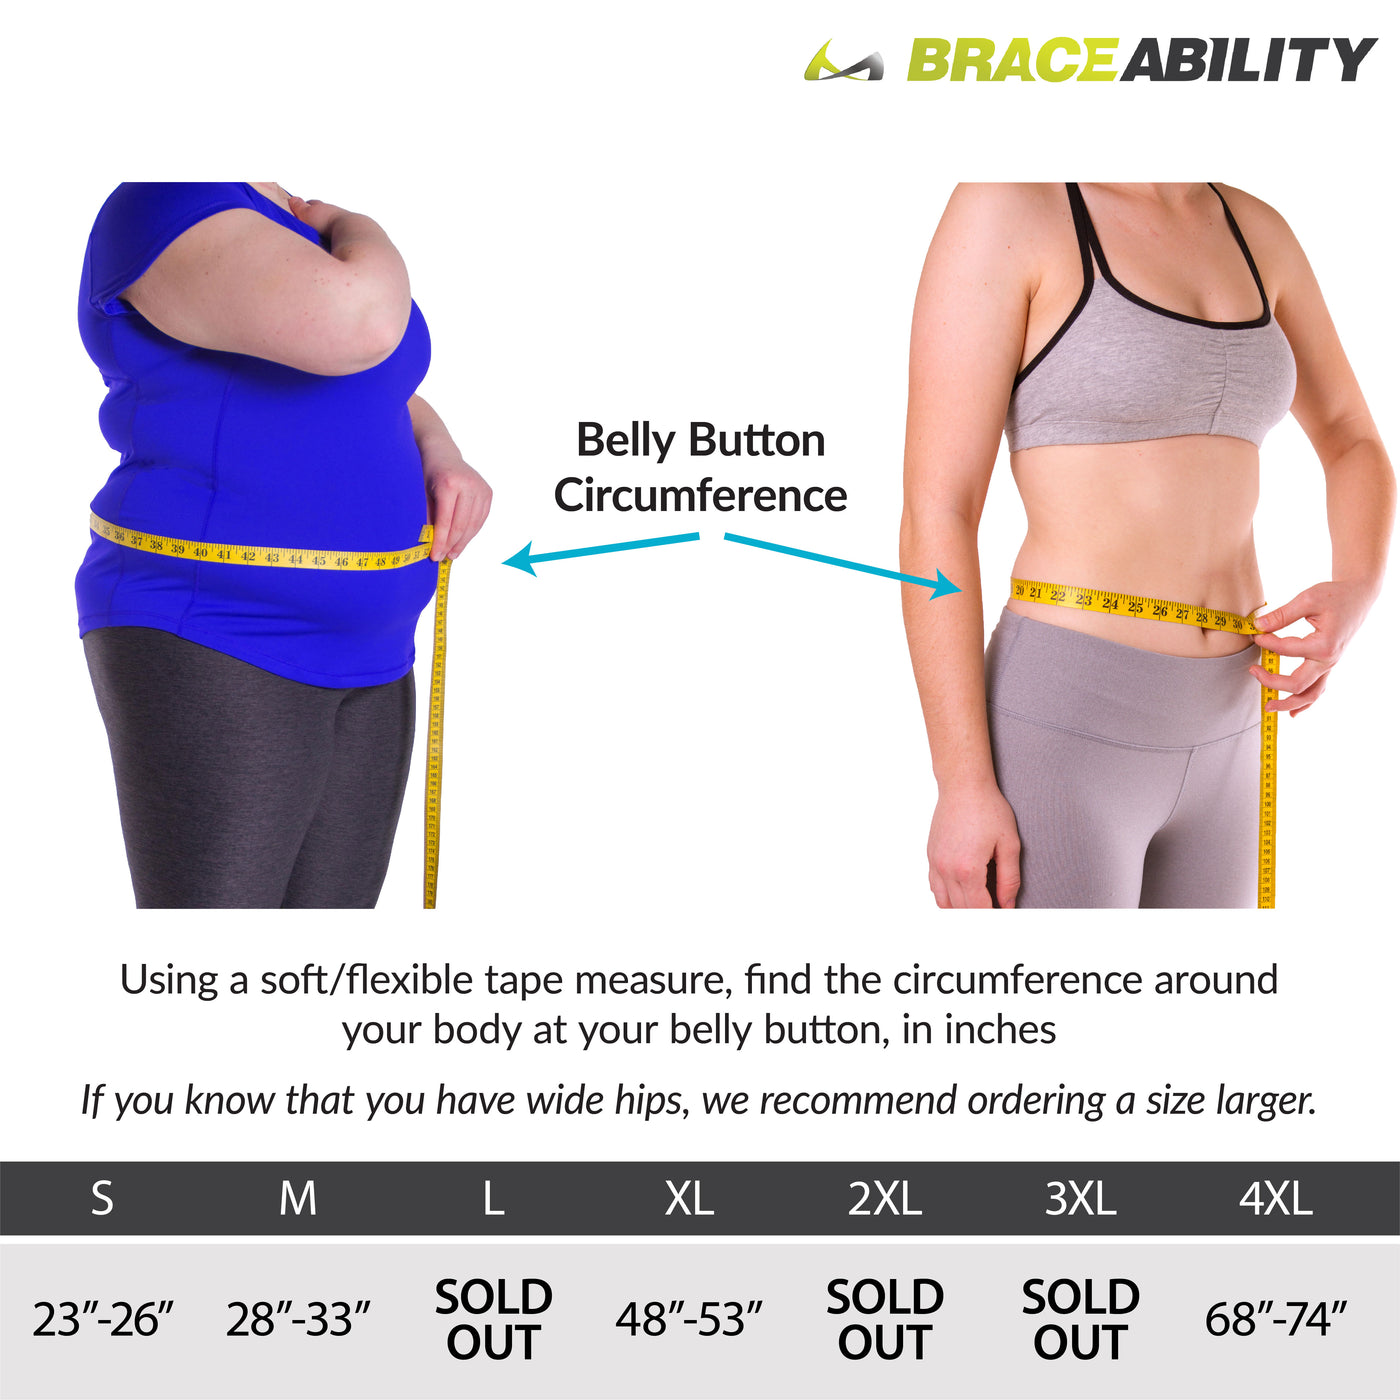 The sizing on the bariatric back brace comes in 4 sizes. Measure around your body at the widest point.